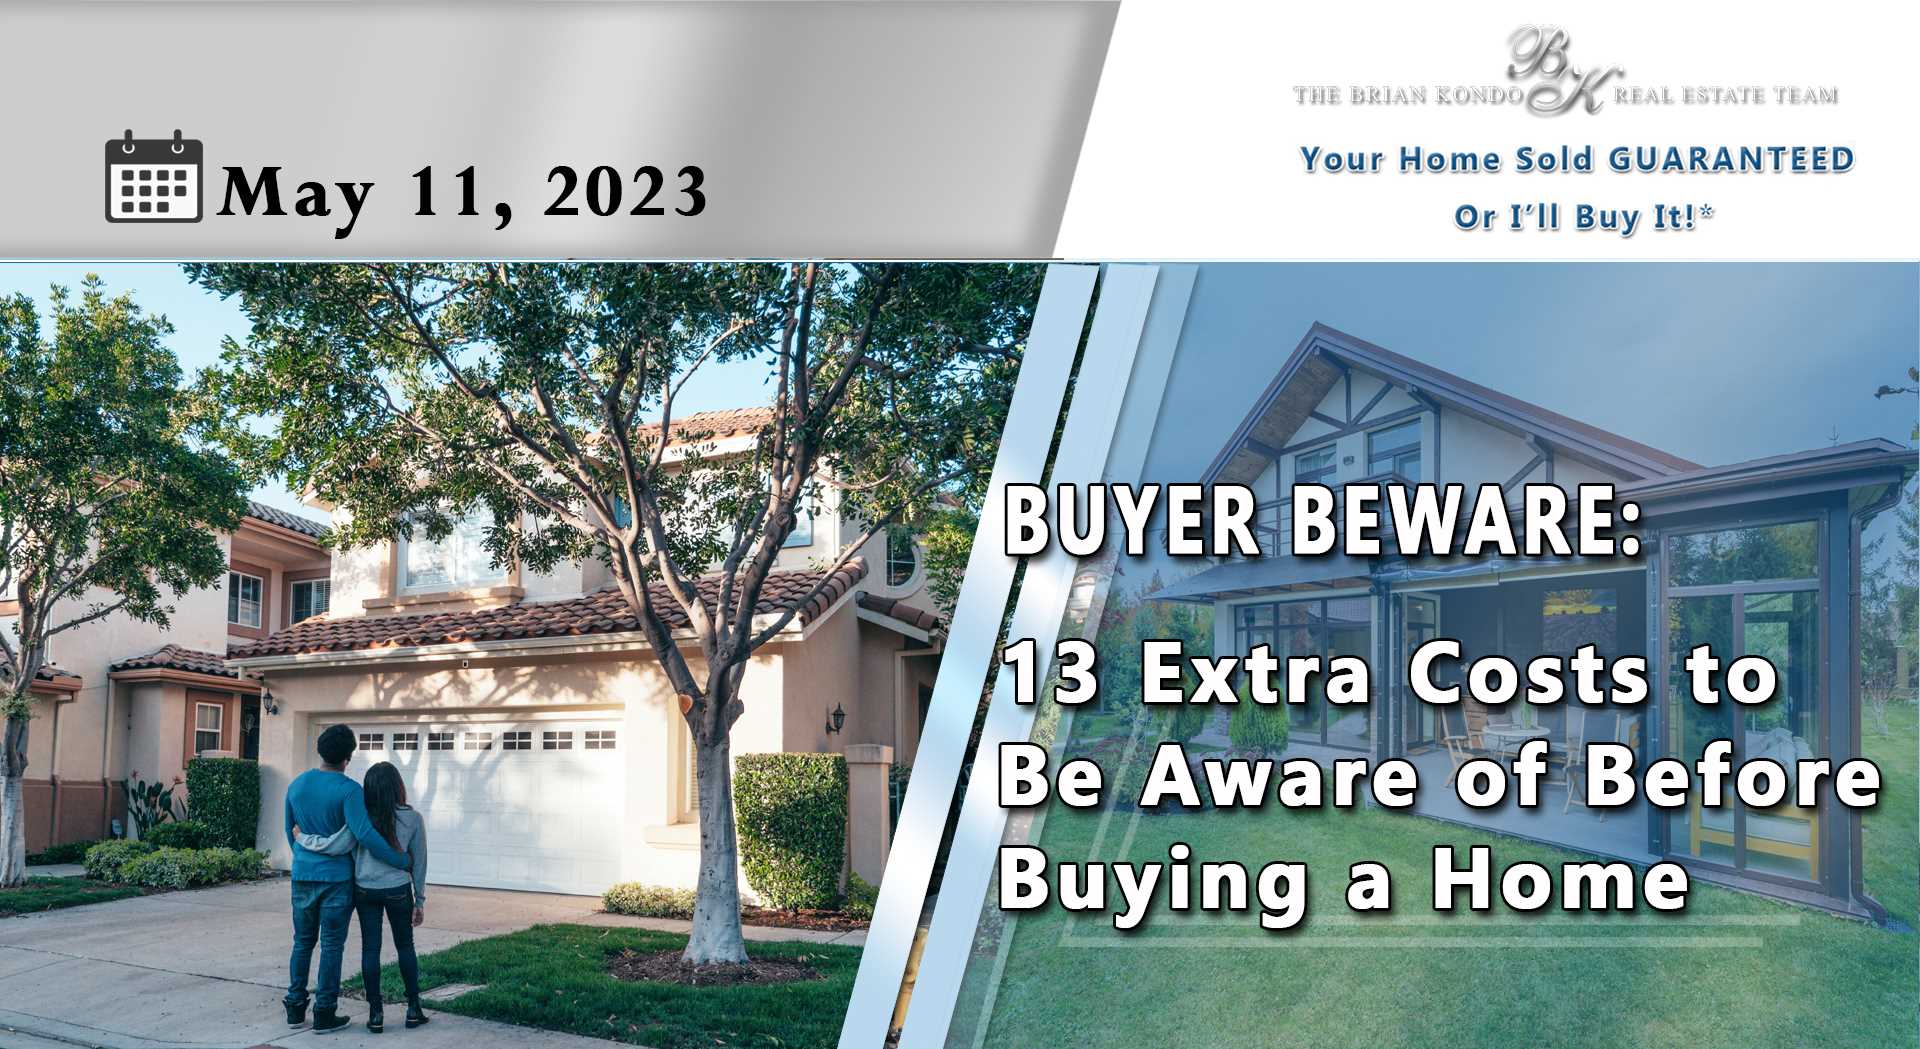 BUYER BEWARE: 13 Extra Costs to Be Aware of Before Buying a Home